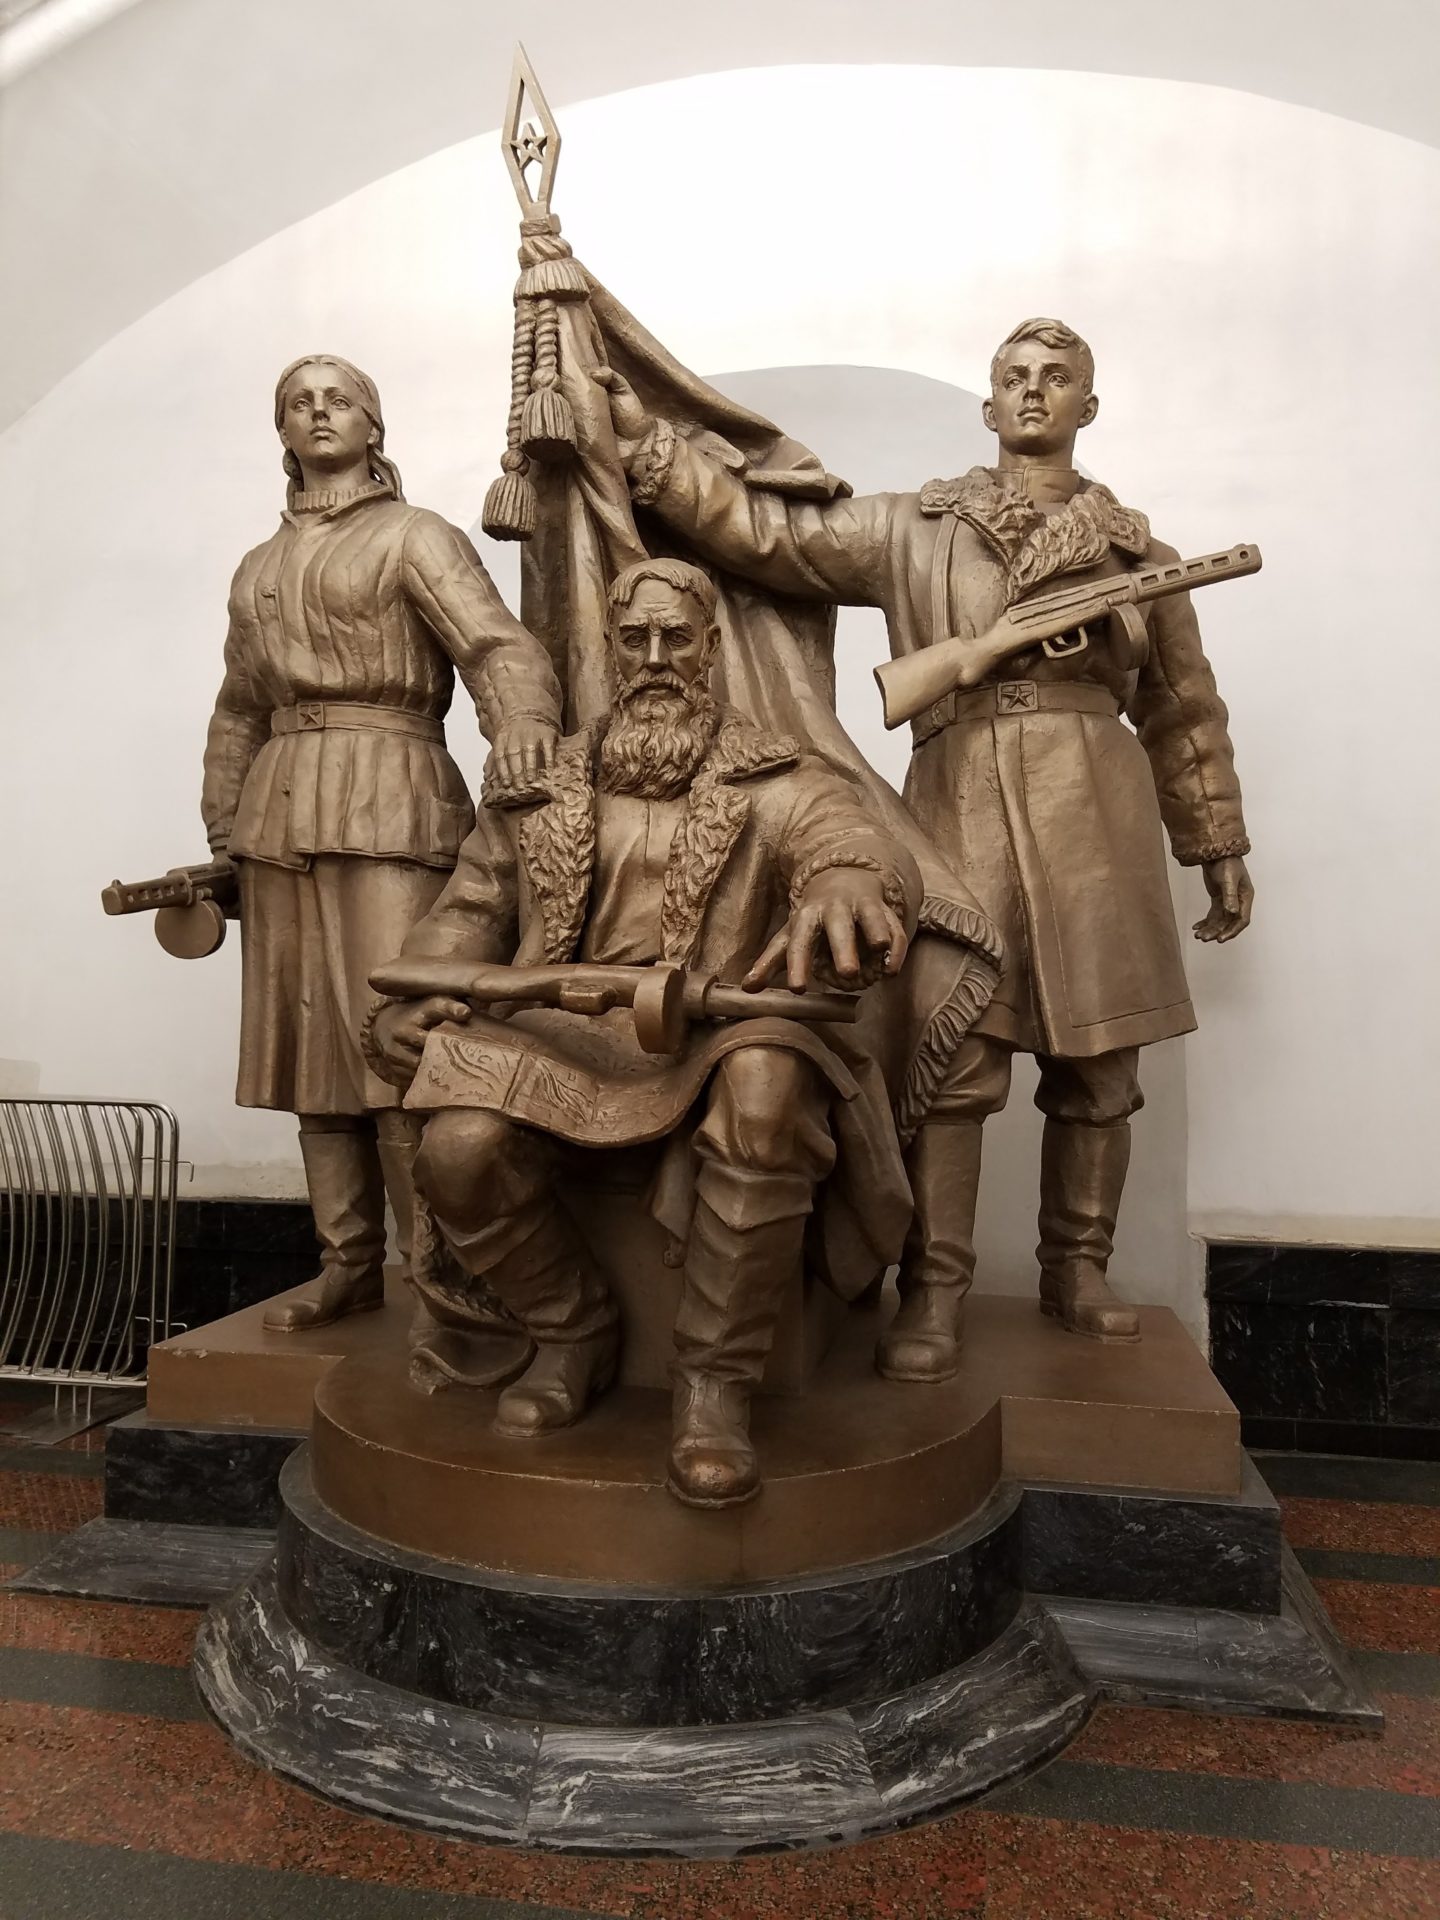 a statue of a man with a beard and a man holding a gun